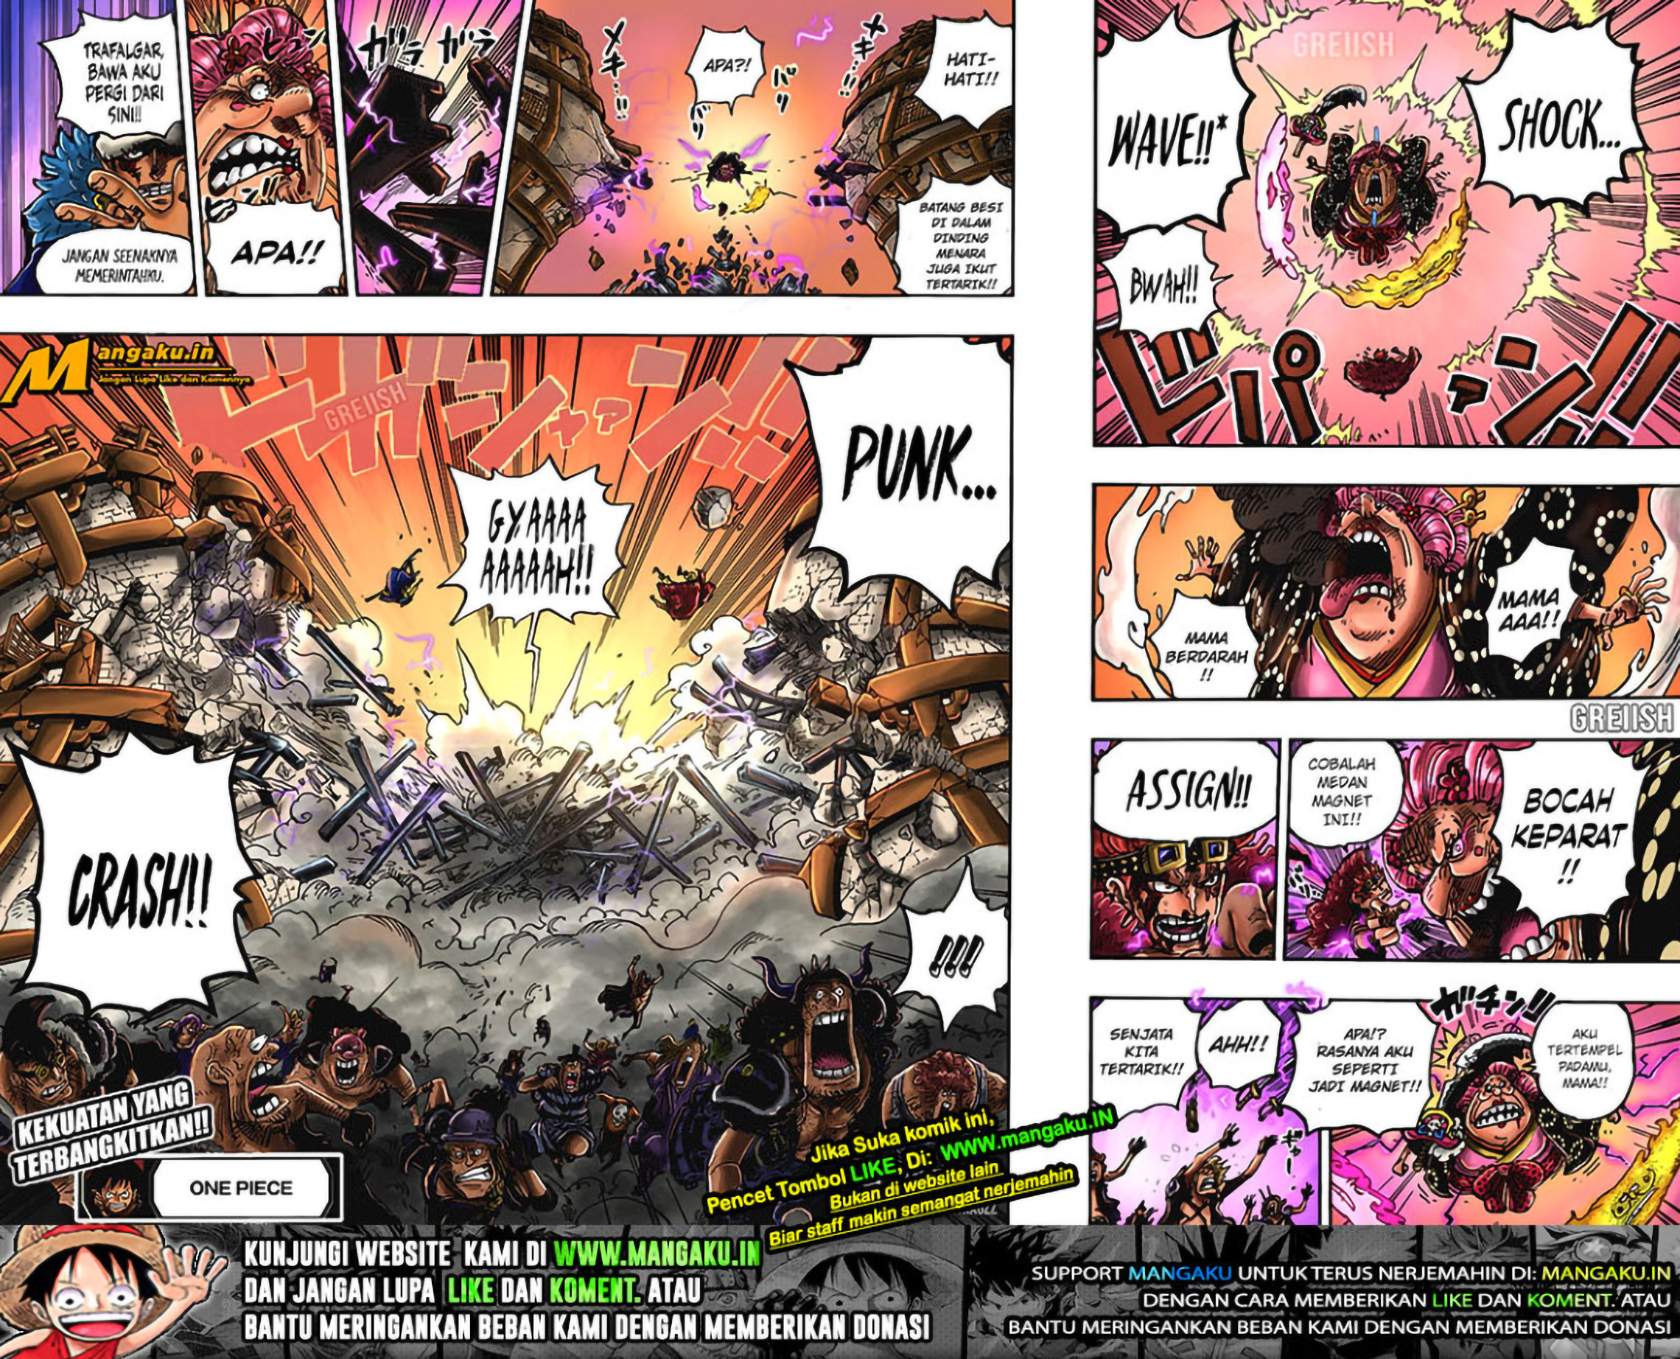 One Piece Chapter 1030 HQ